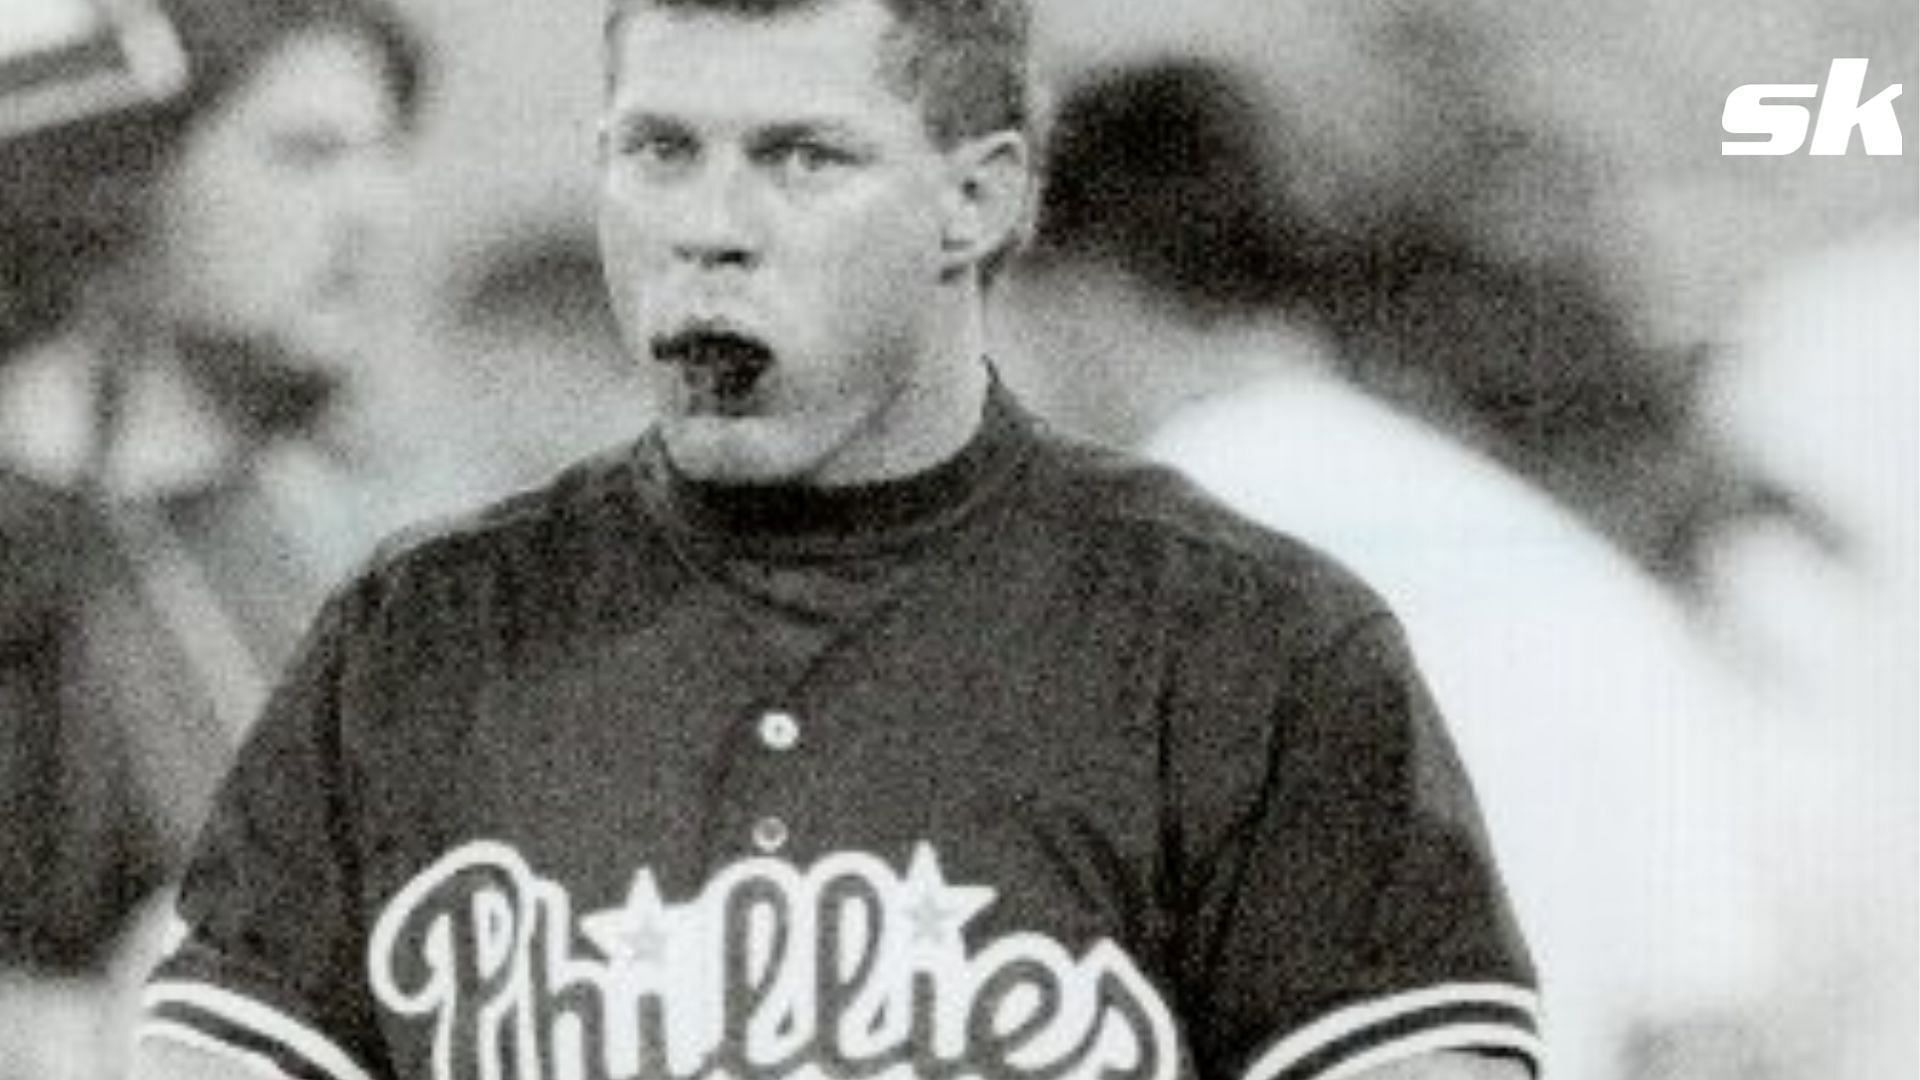 MLB legend Lenny Dykstra once revealed he used to add steroids to